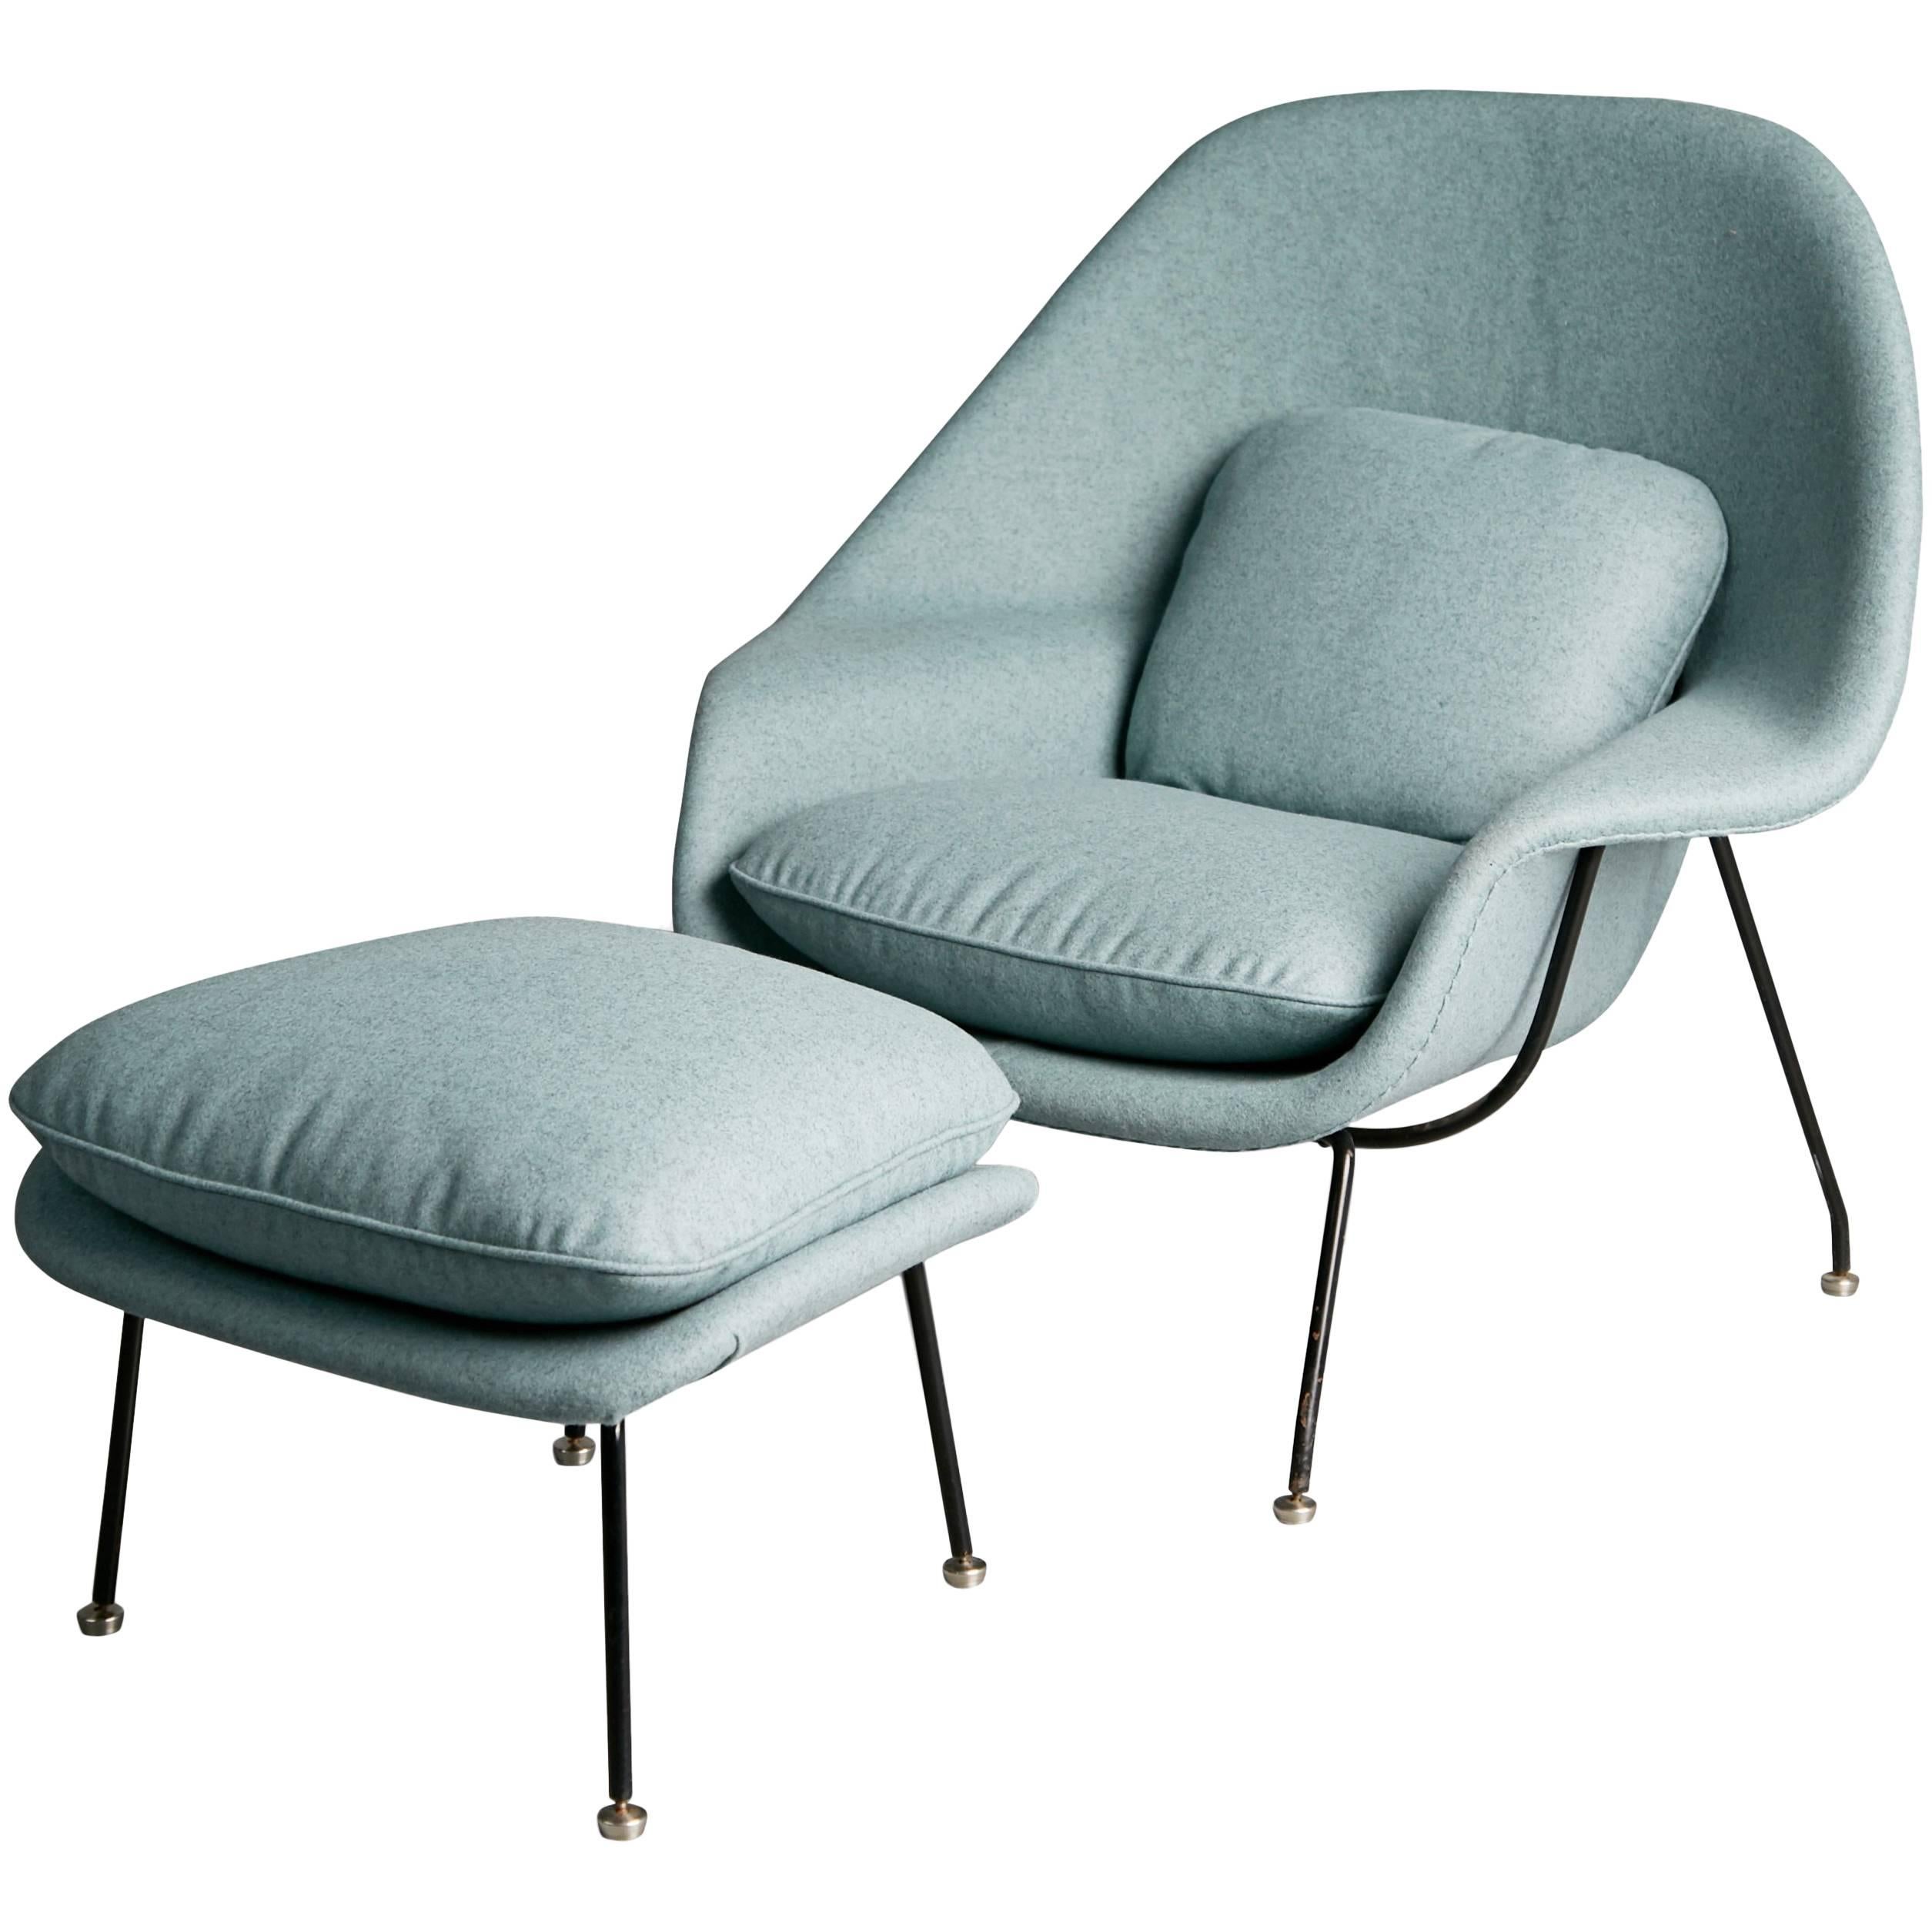 Newly Upholstered Womb Chair and Ottoman by Eero Saarinen for Knoll, circa 1950